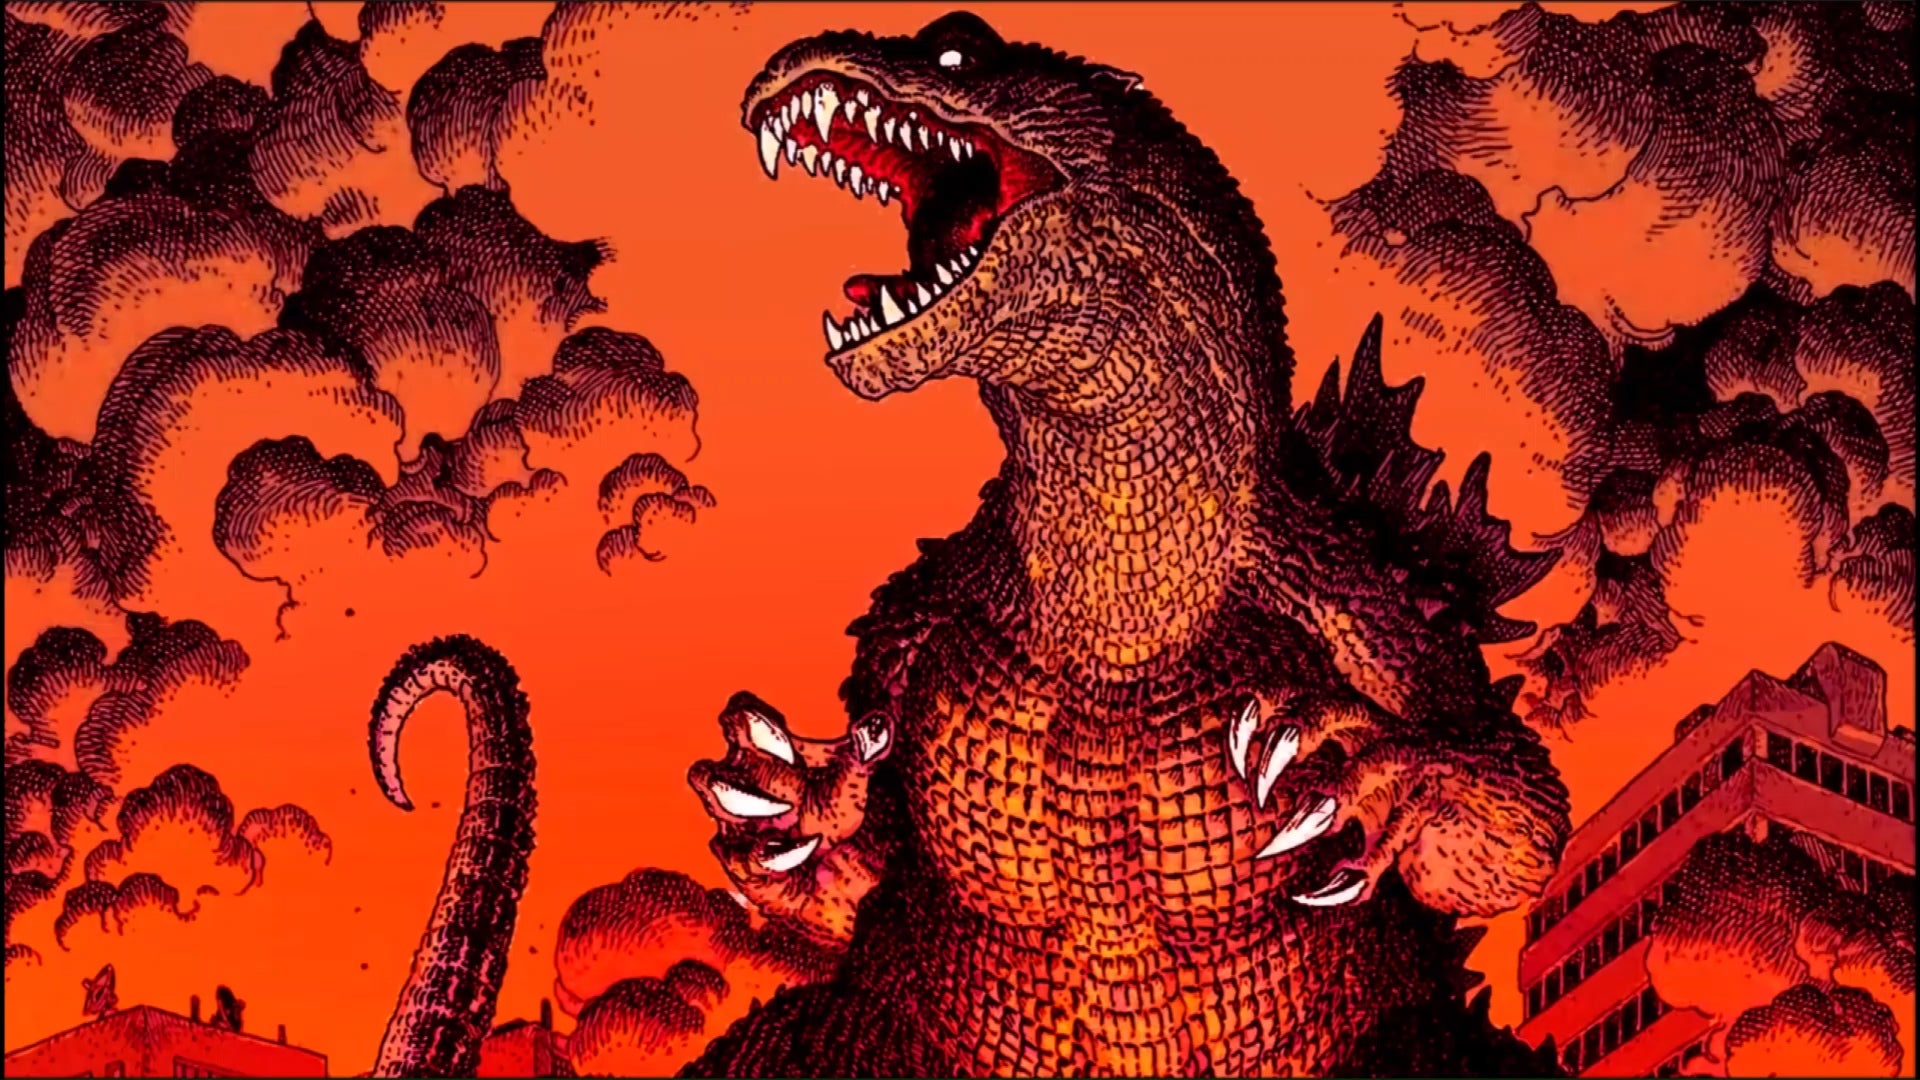 I made one of my favorite picture of 2001 Goji into a live wallpaper